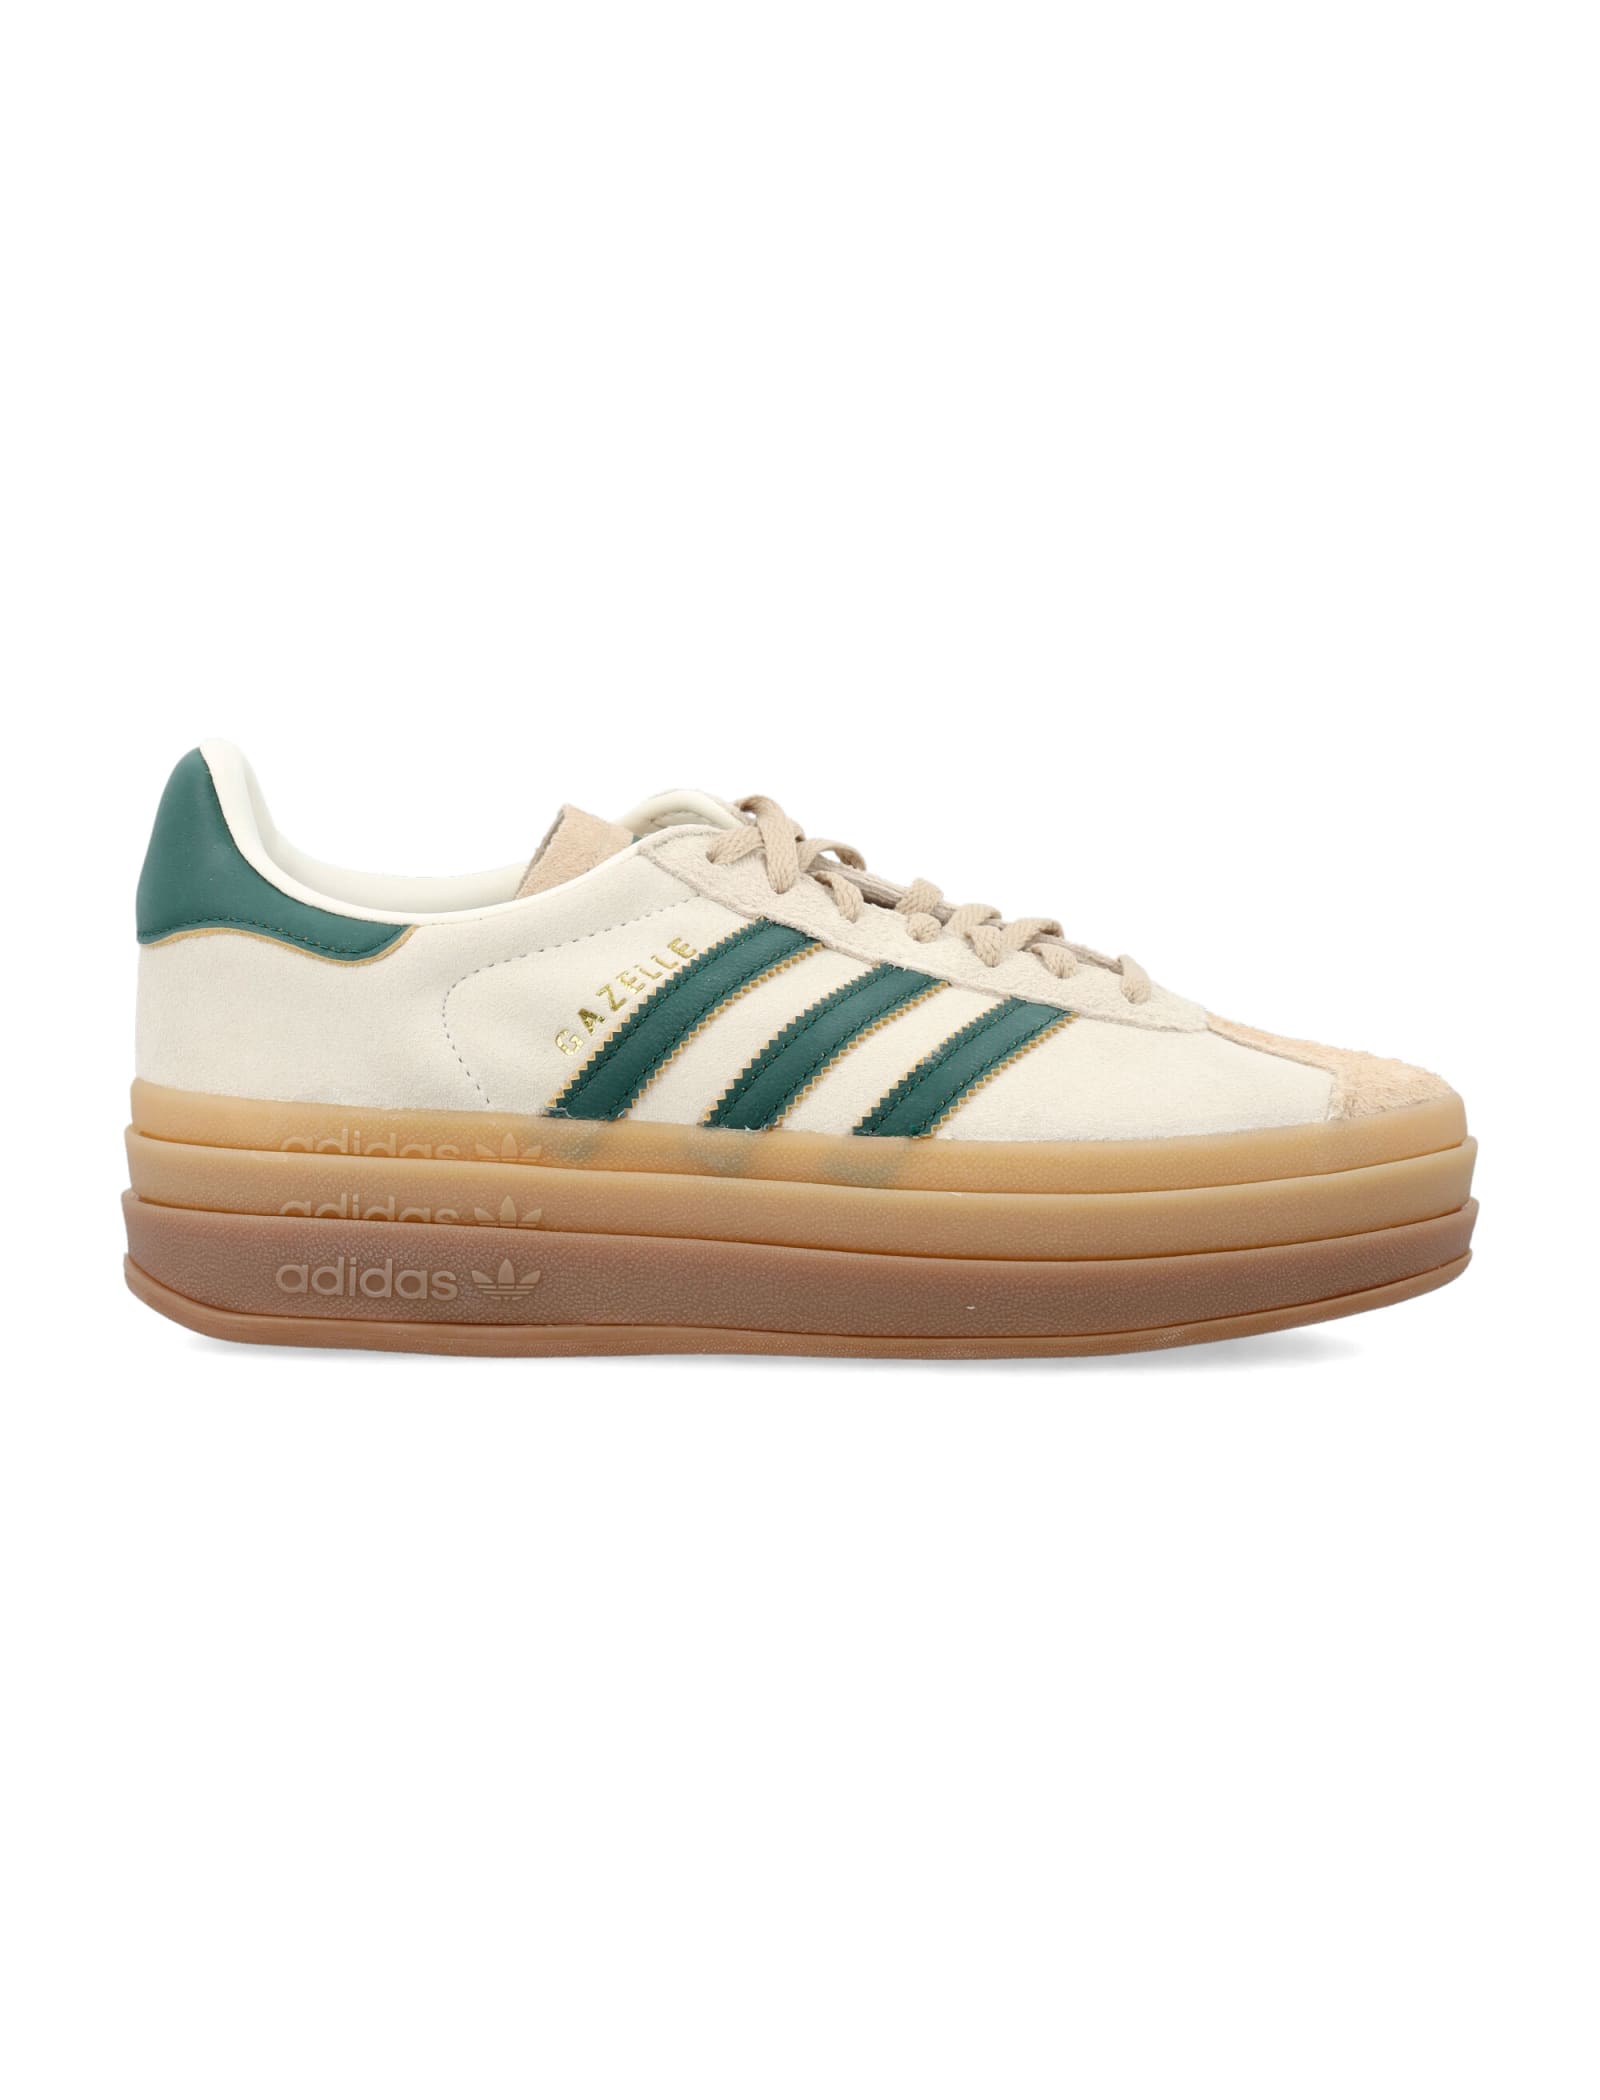 Adidas Originals Gazelle Bold Woman Sneakers In Neutral